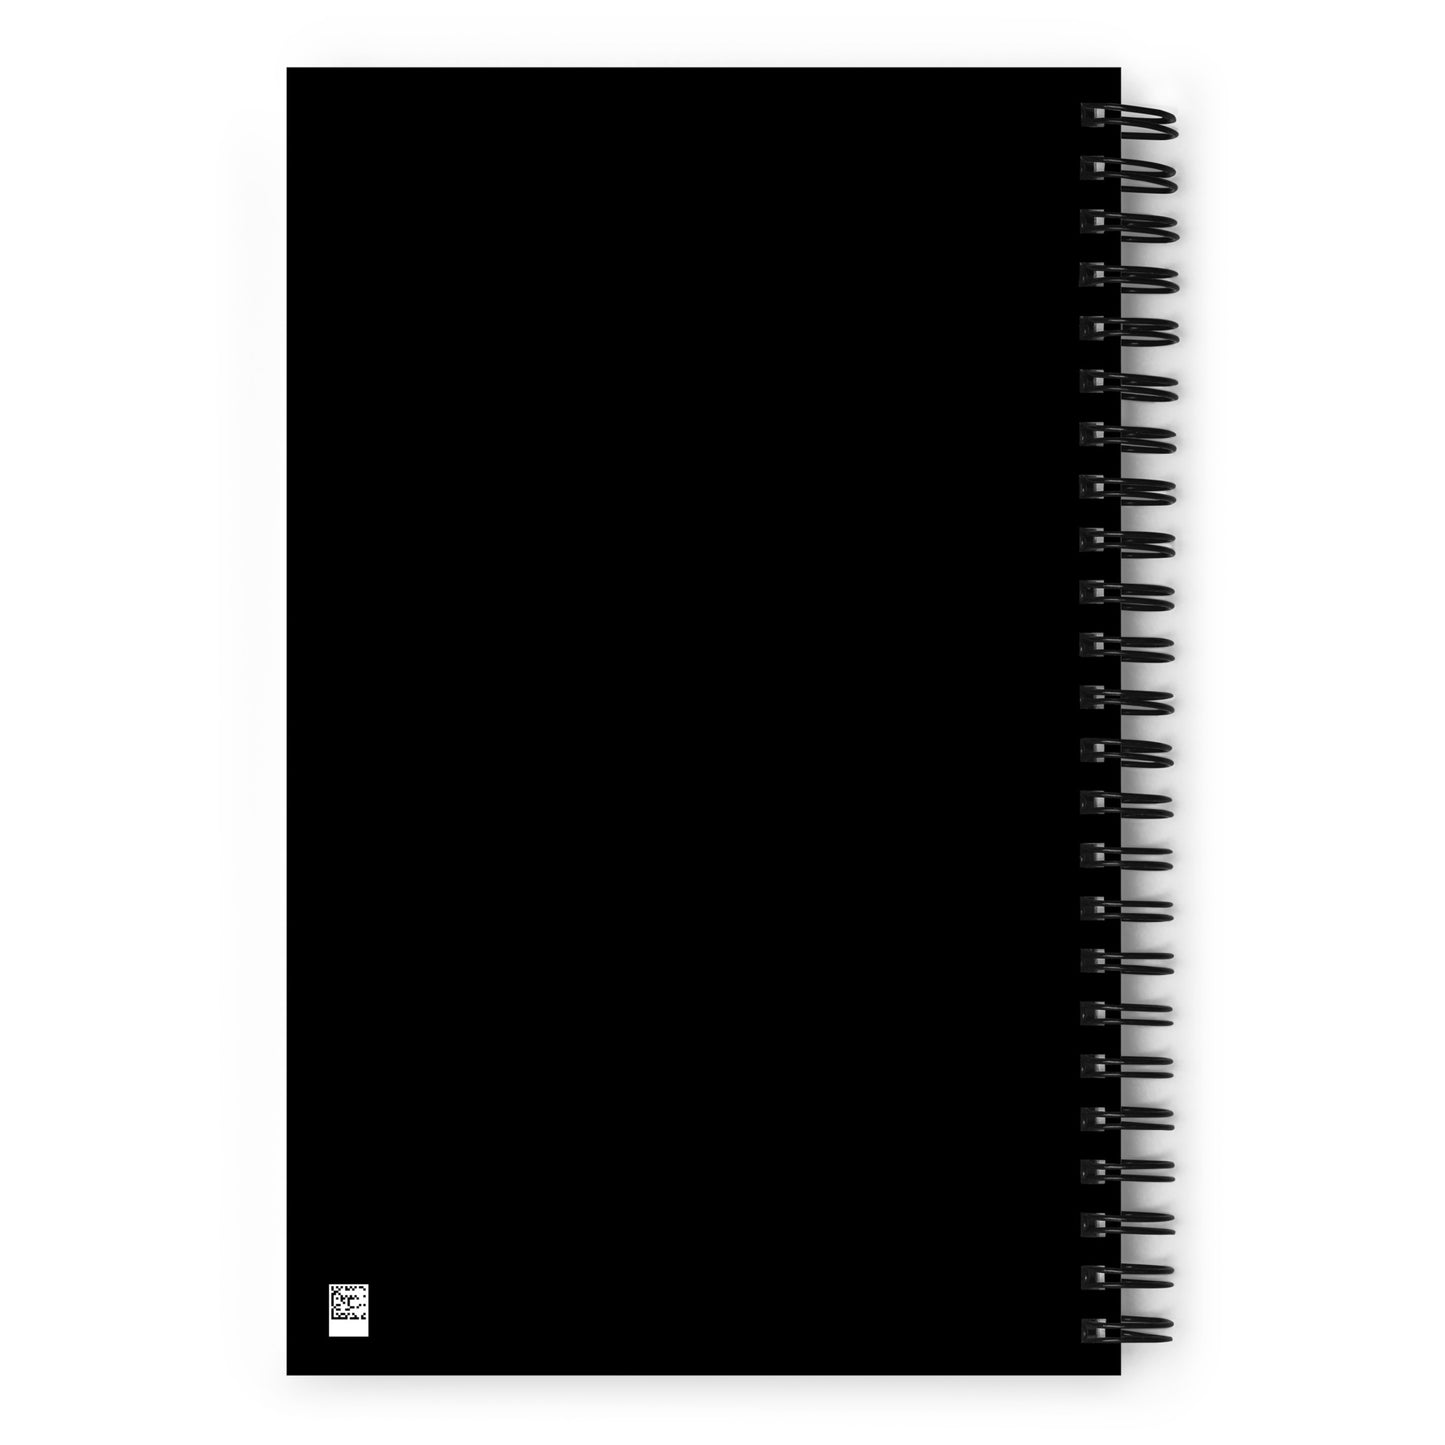 Black Success Is Protest Spiral notebook